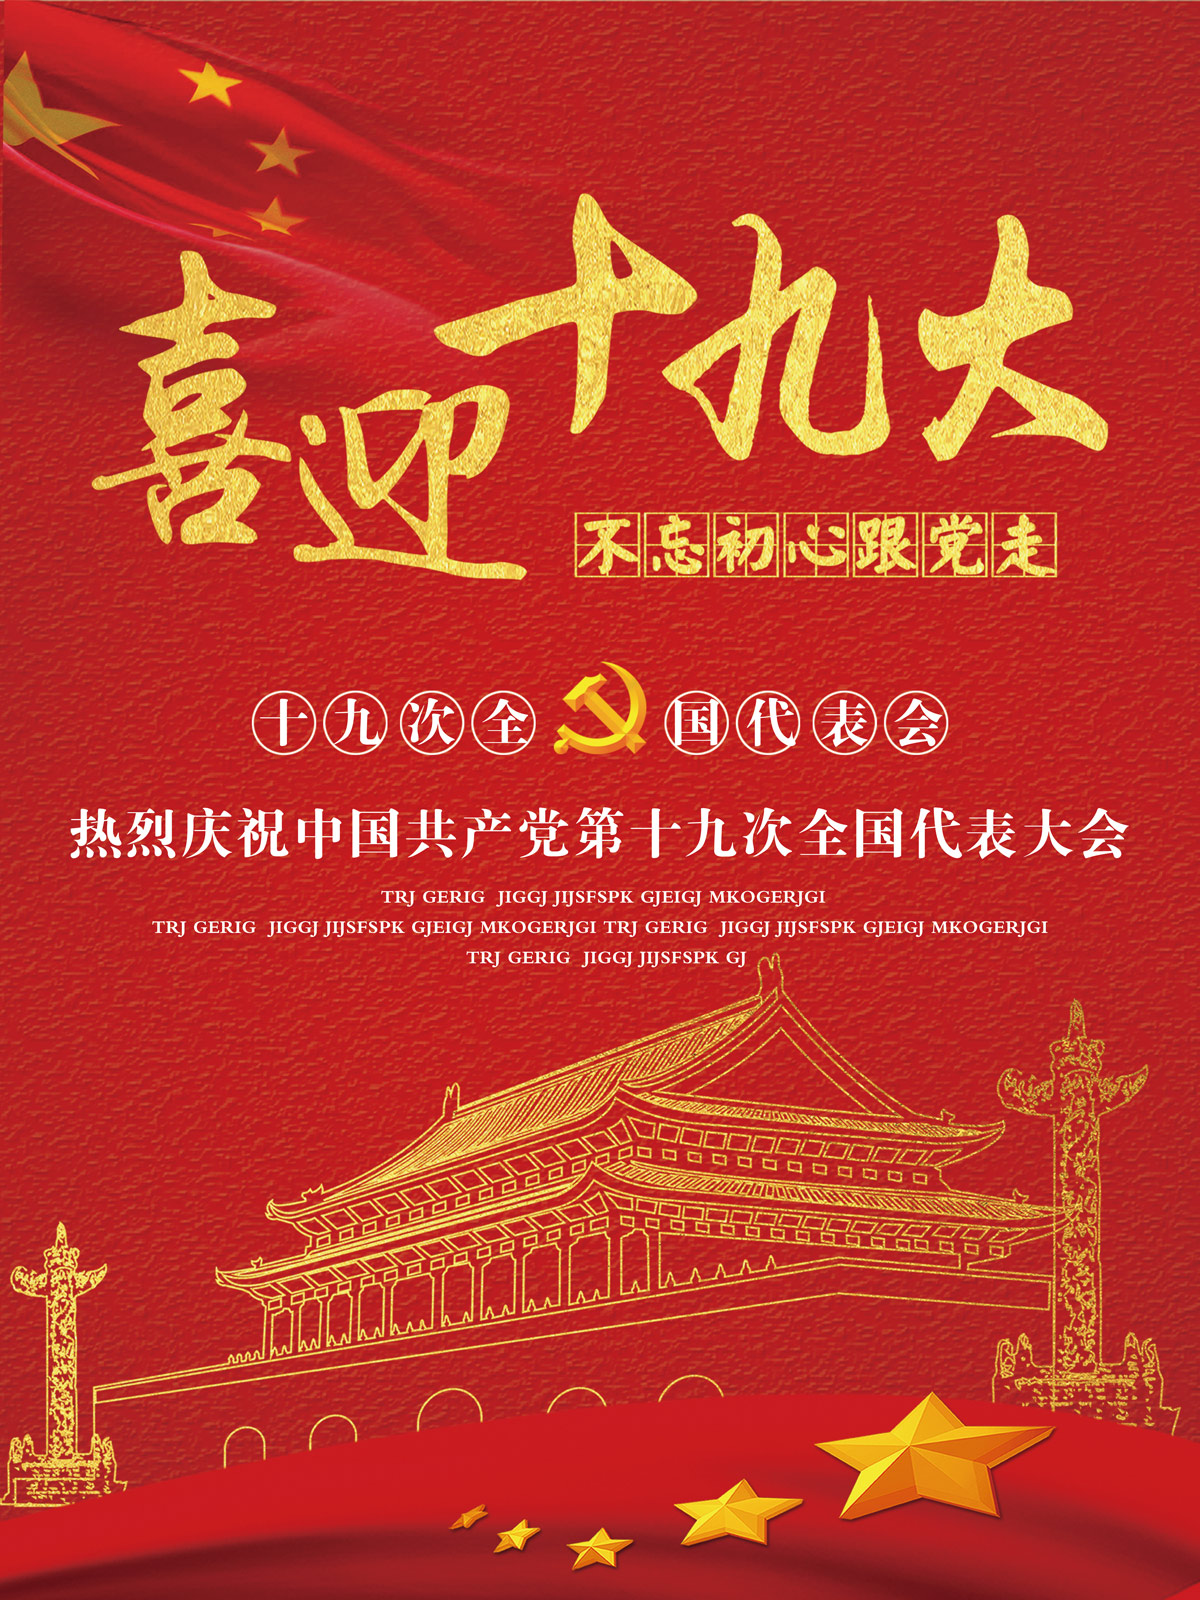 19th National Congress of the Communist Party of China – PSD File Free Download #.8